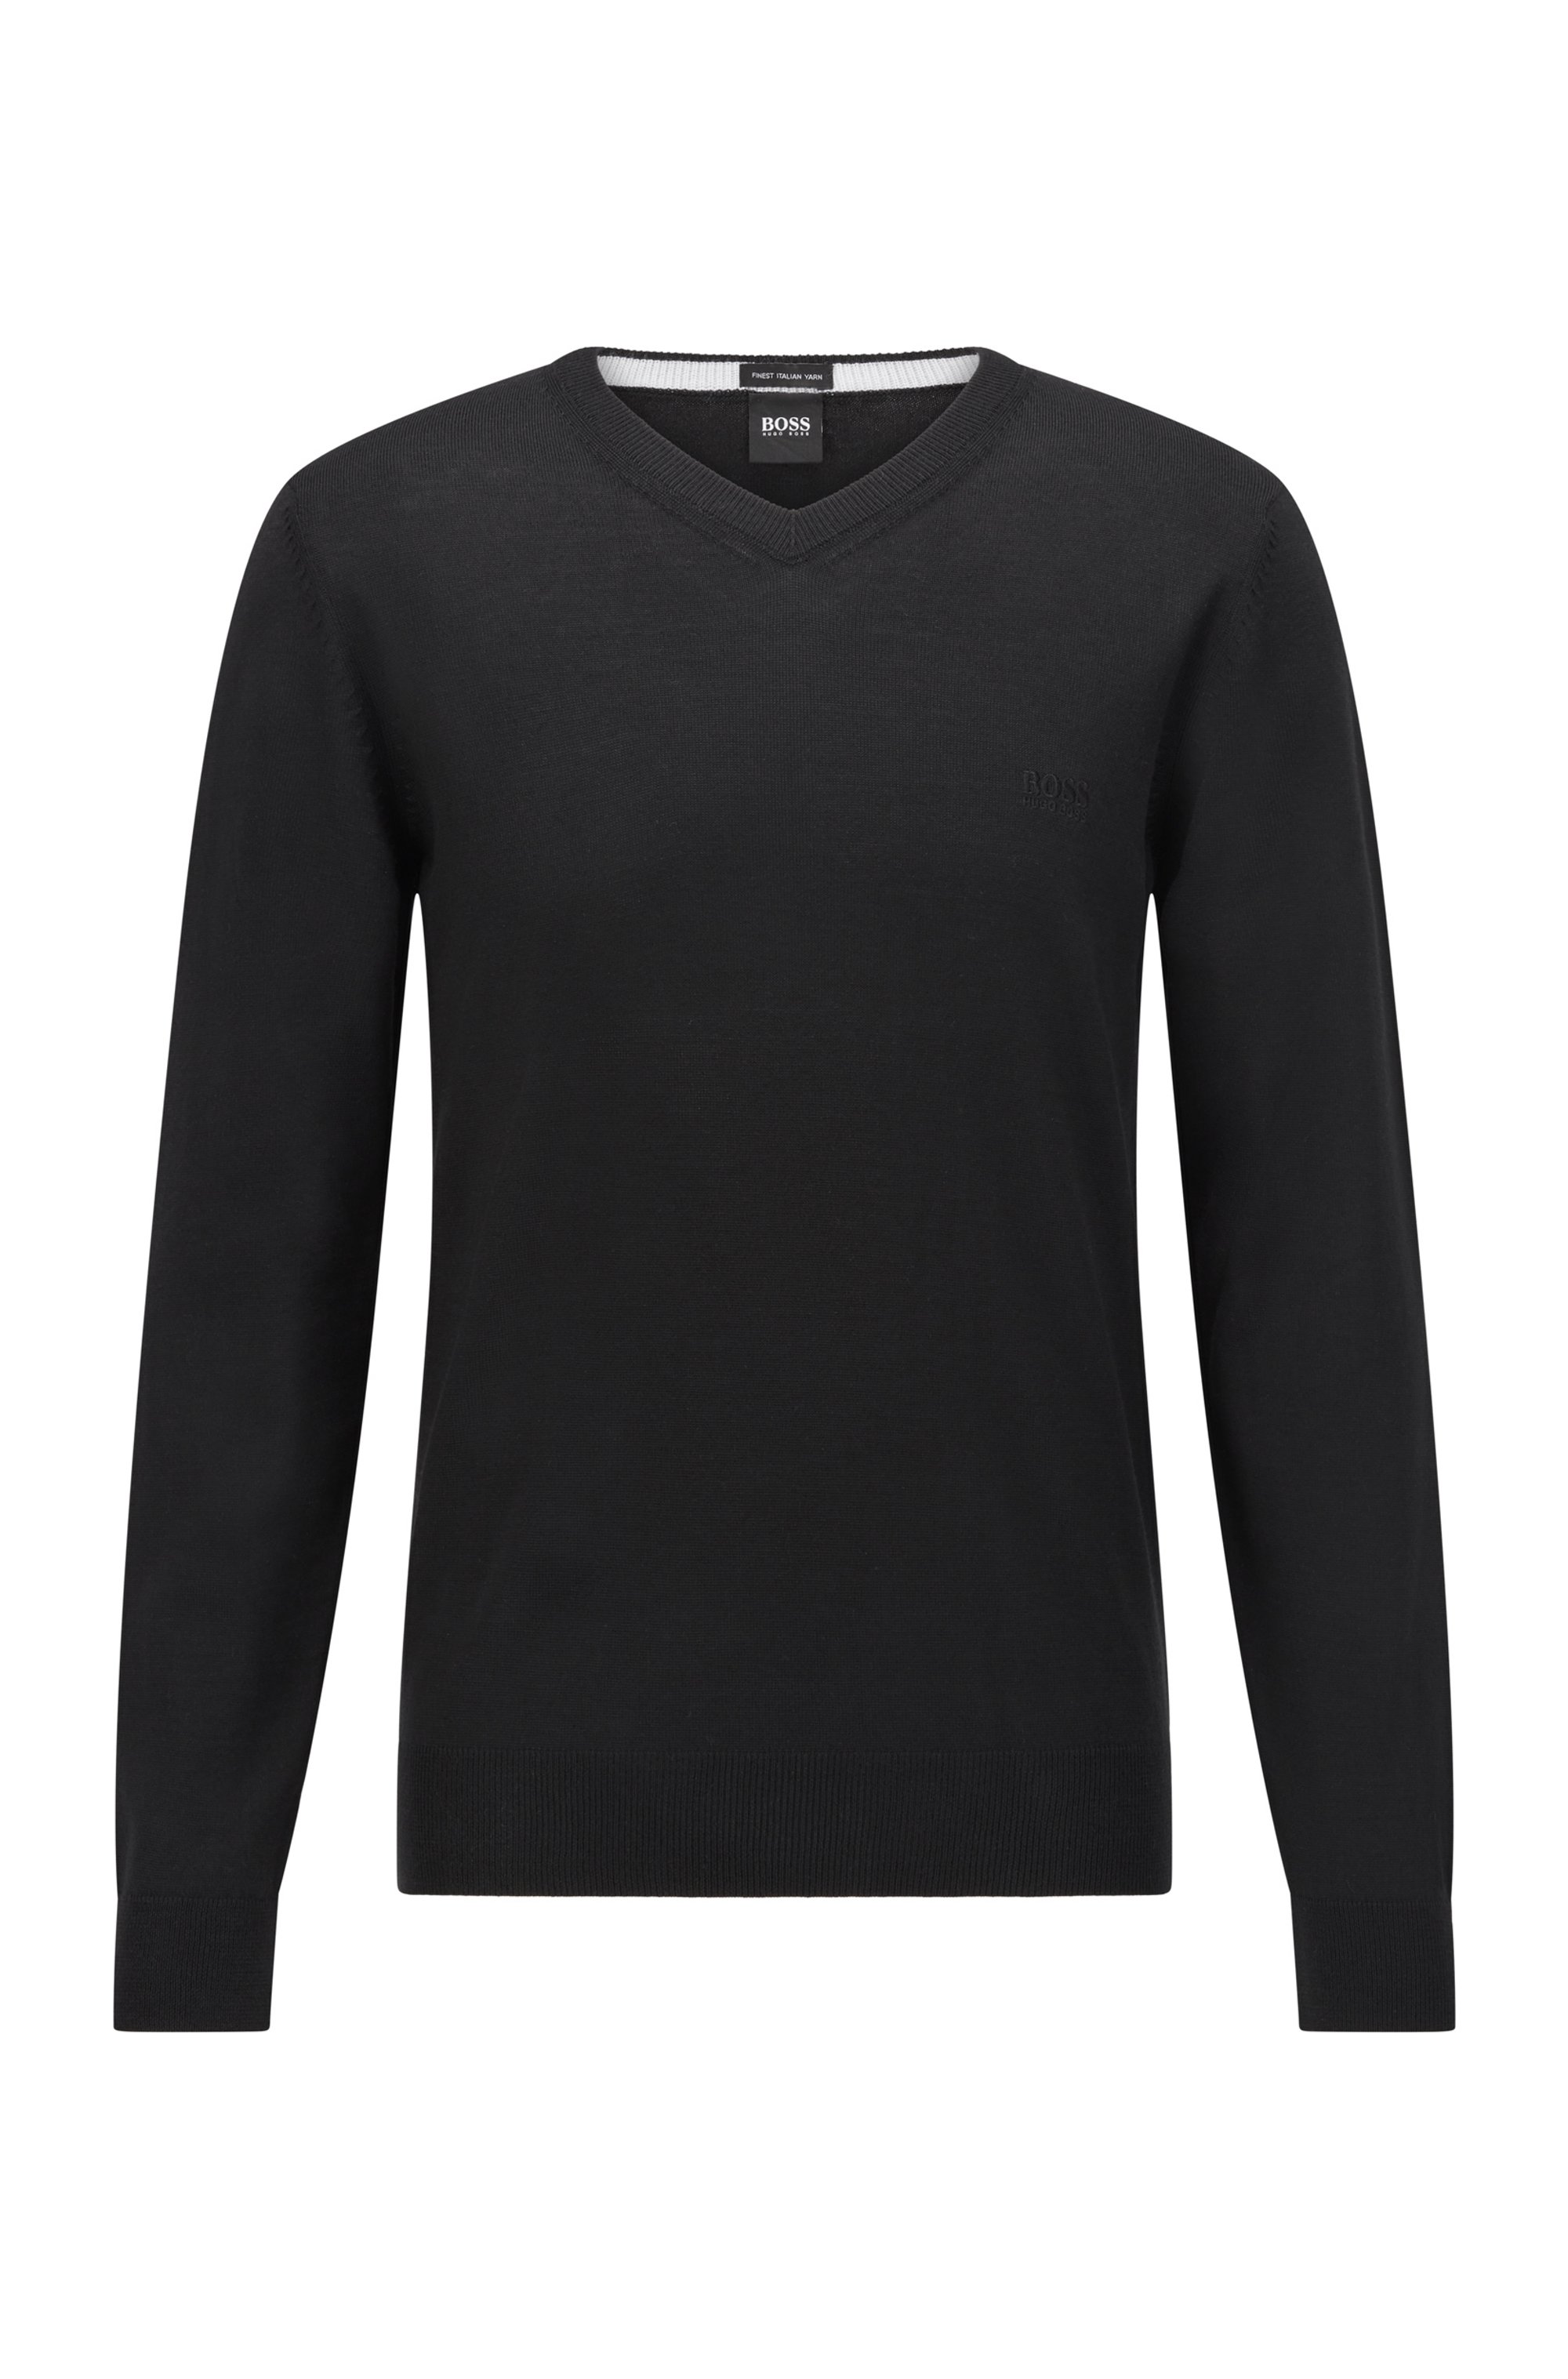 V-neck sweater in Italian virgin wool with logo embroidery, Black